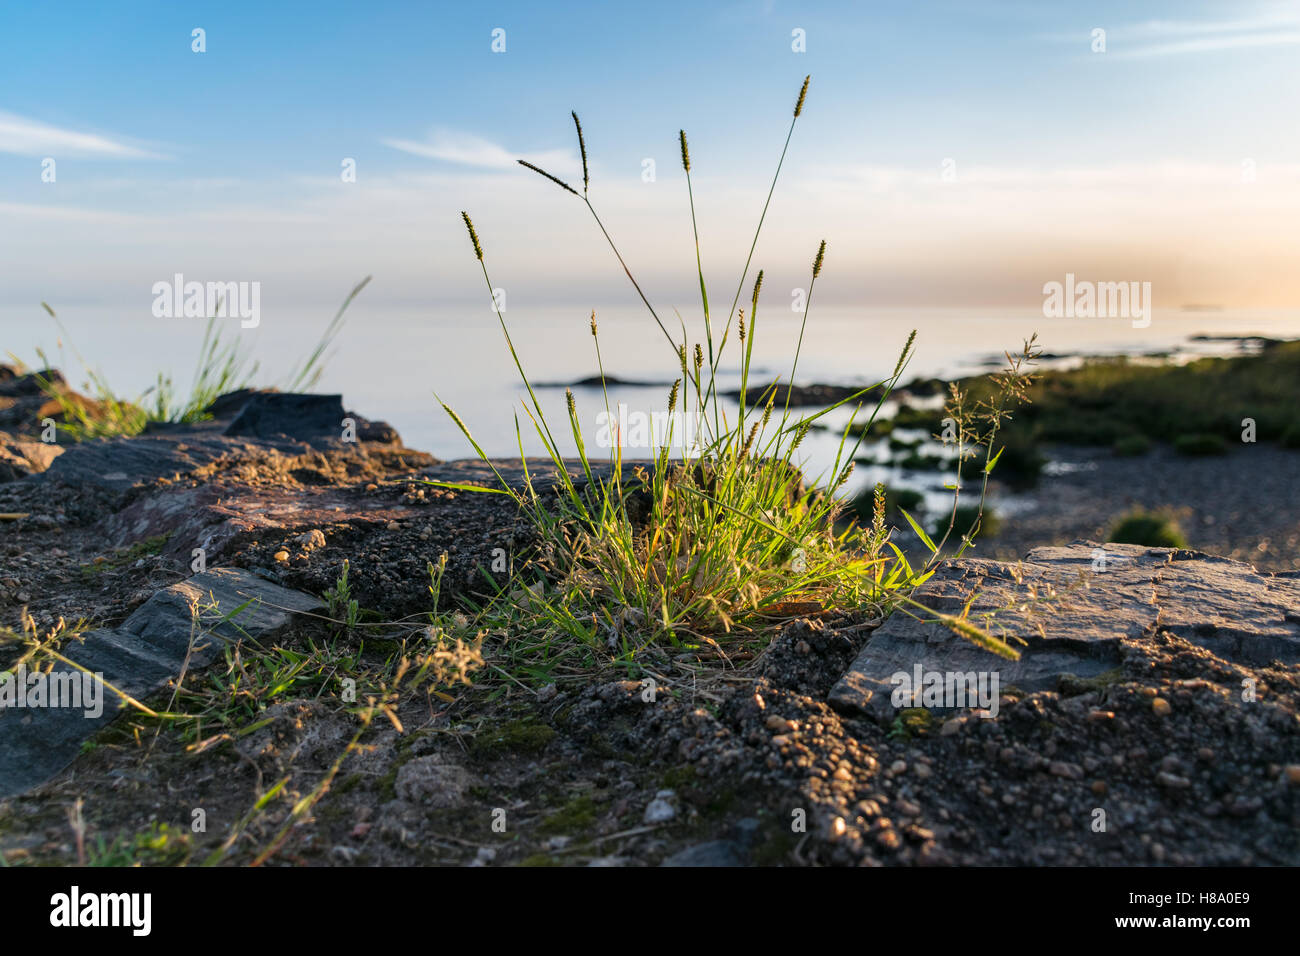 A patch of grass on the edge of a rocky cliff over the Río de la Plata with a soft-focused sunset background Stock Photo